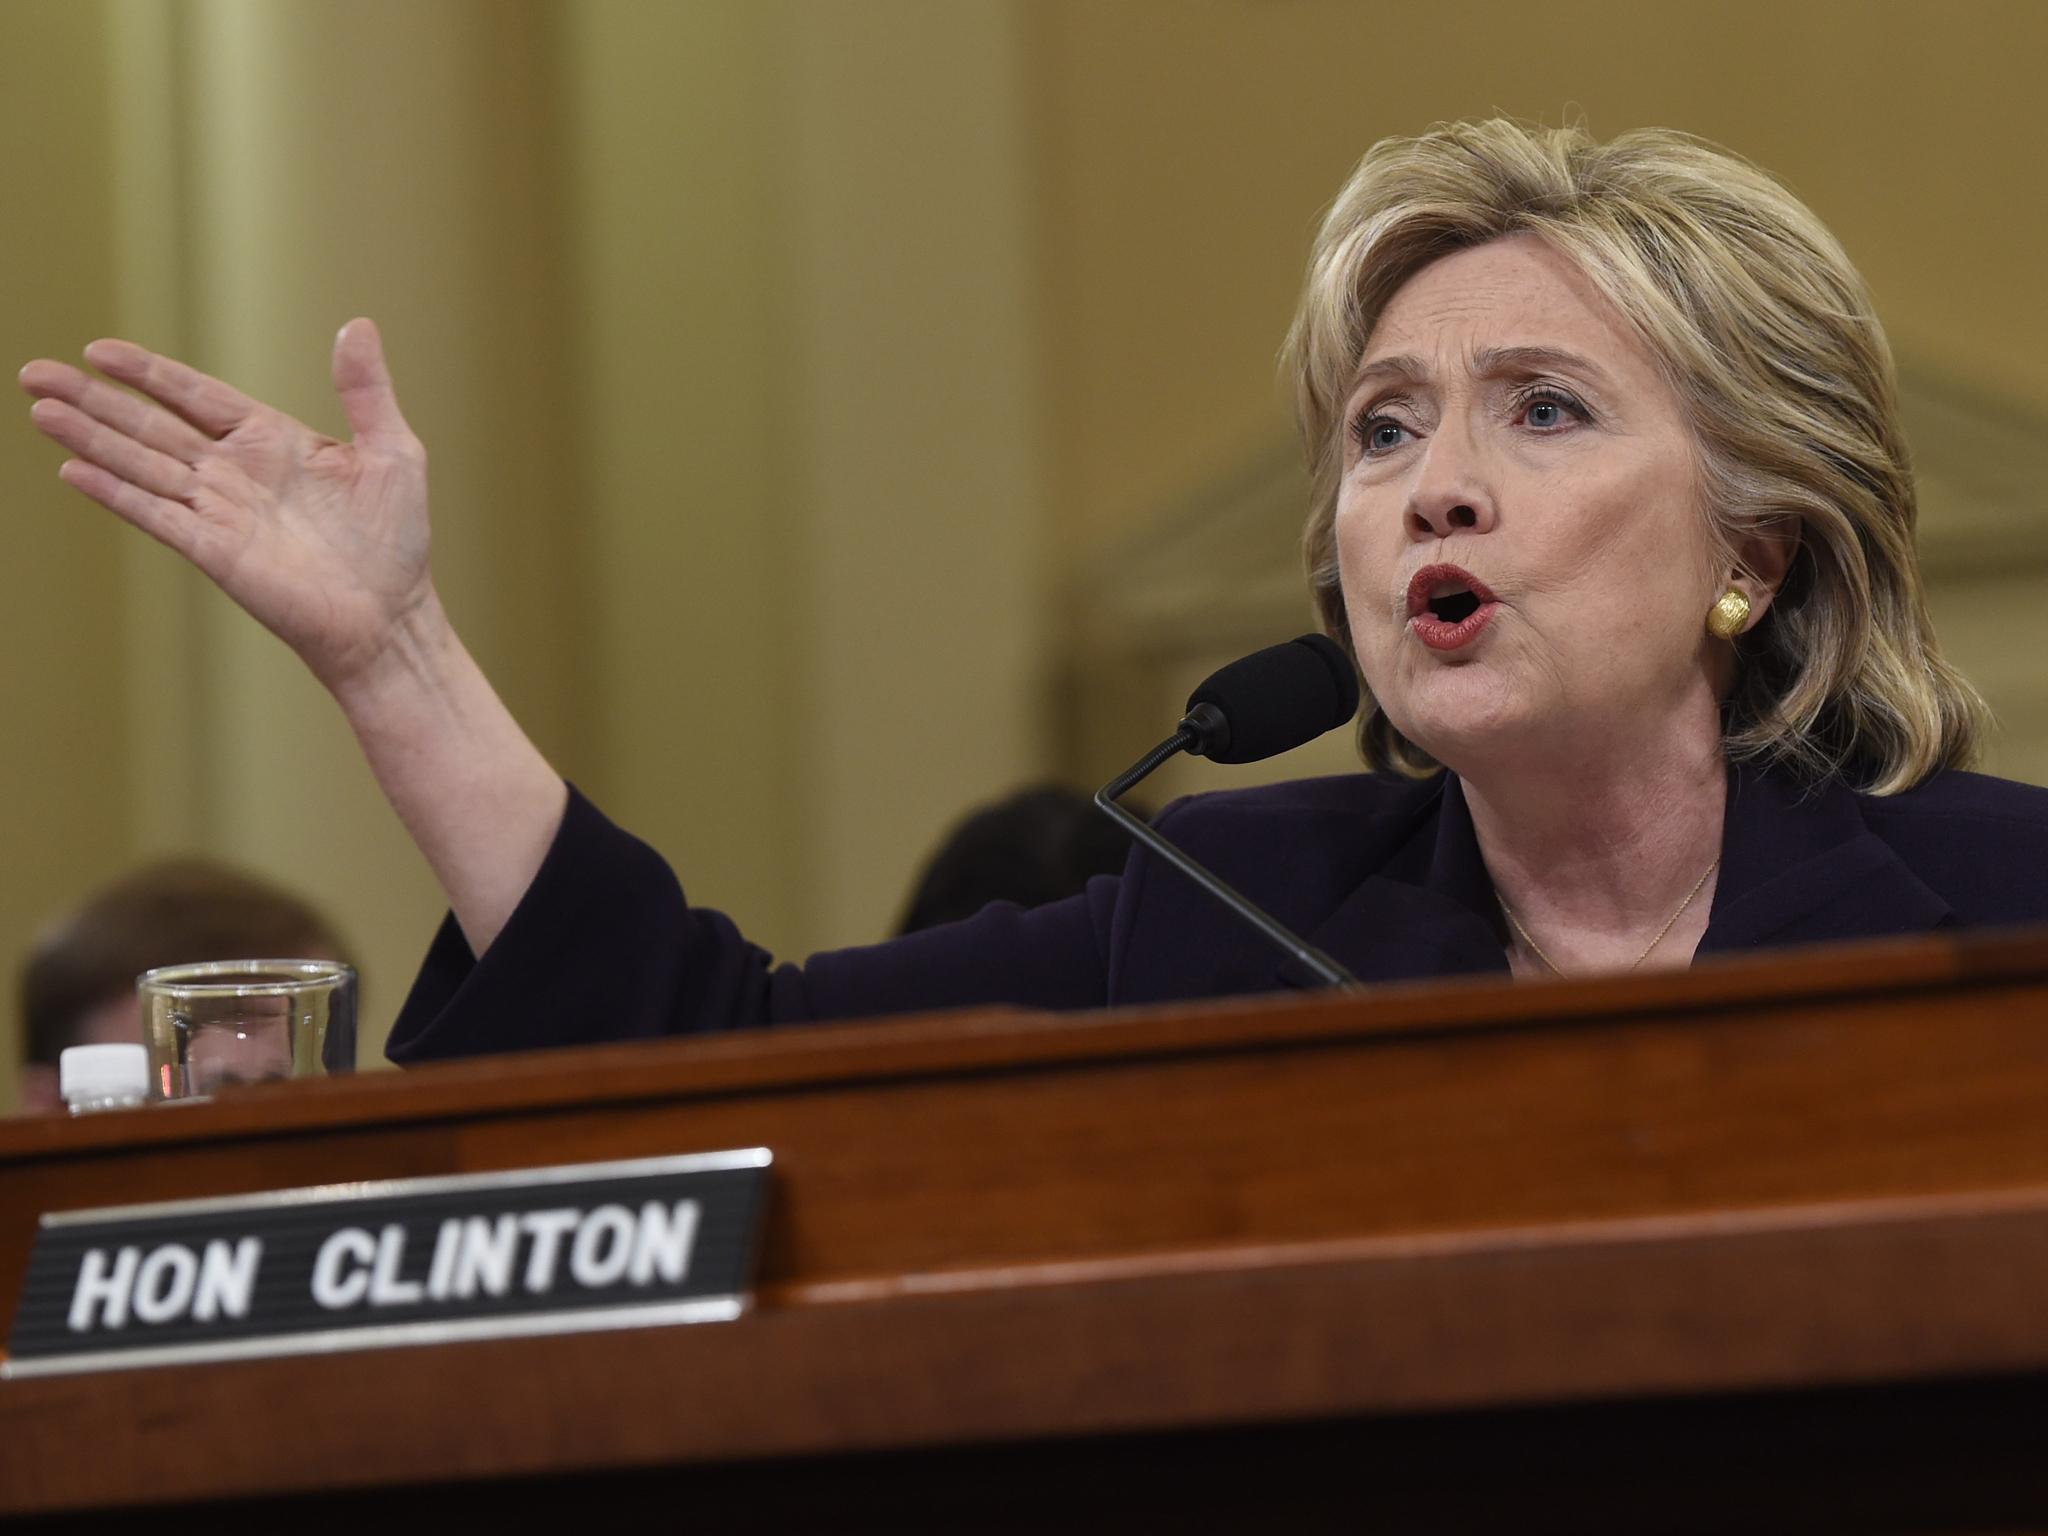 The House Select Committee report failed to find anything that further discredited Hillary Clinton